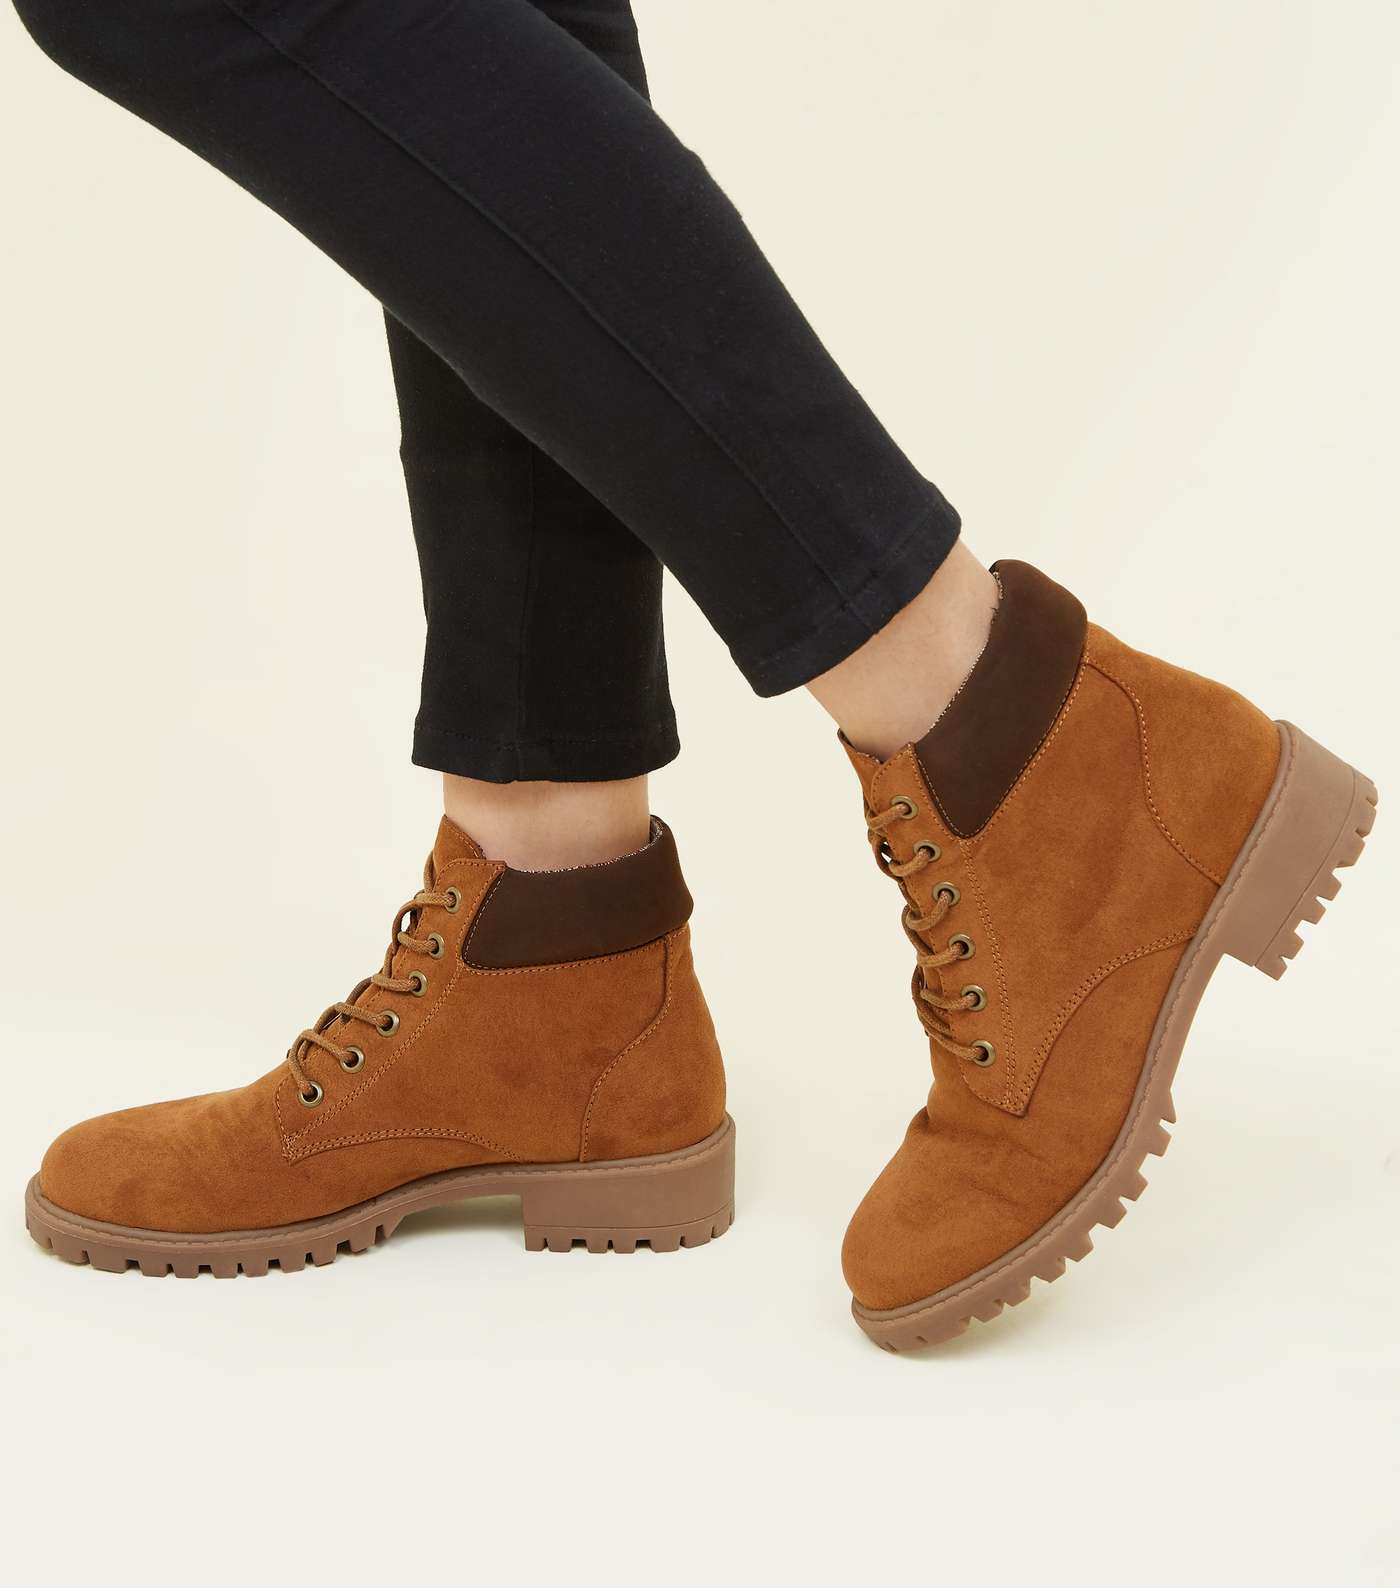 Girls Tan Suedette Worker Boots Image 2